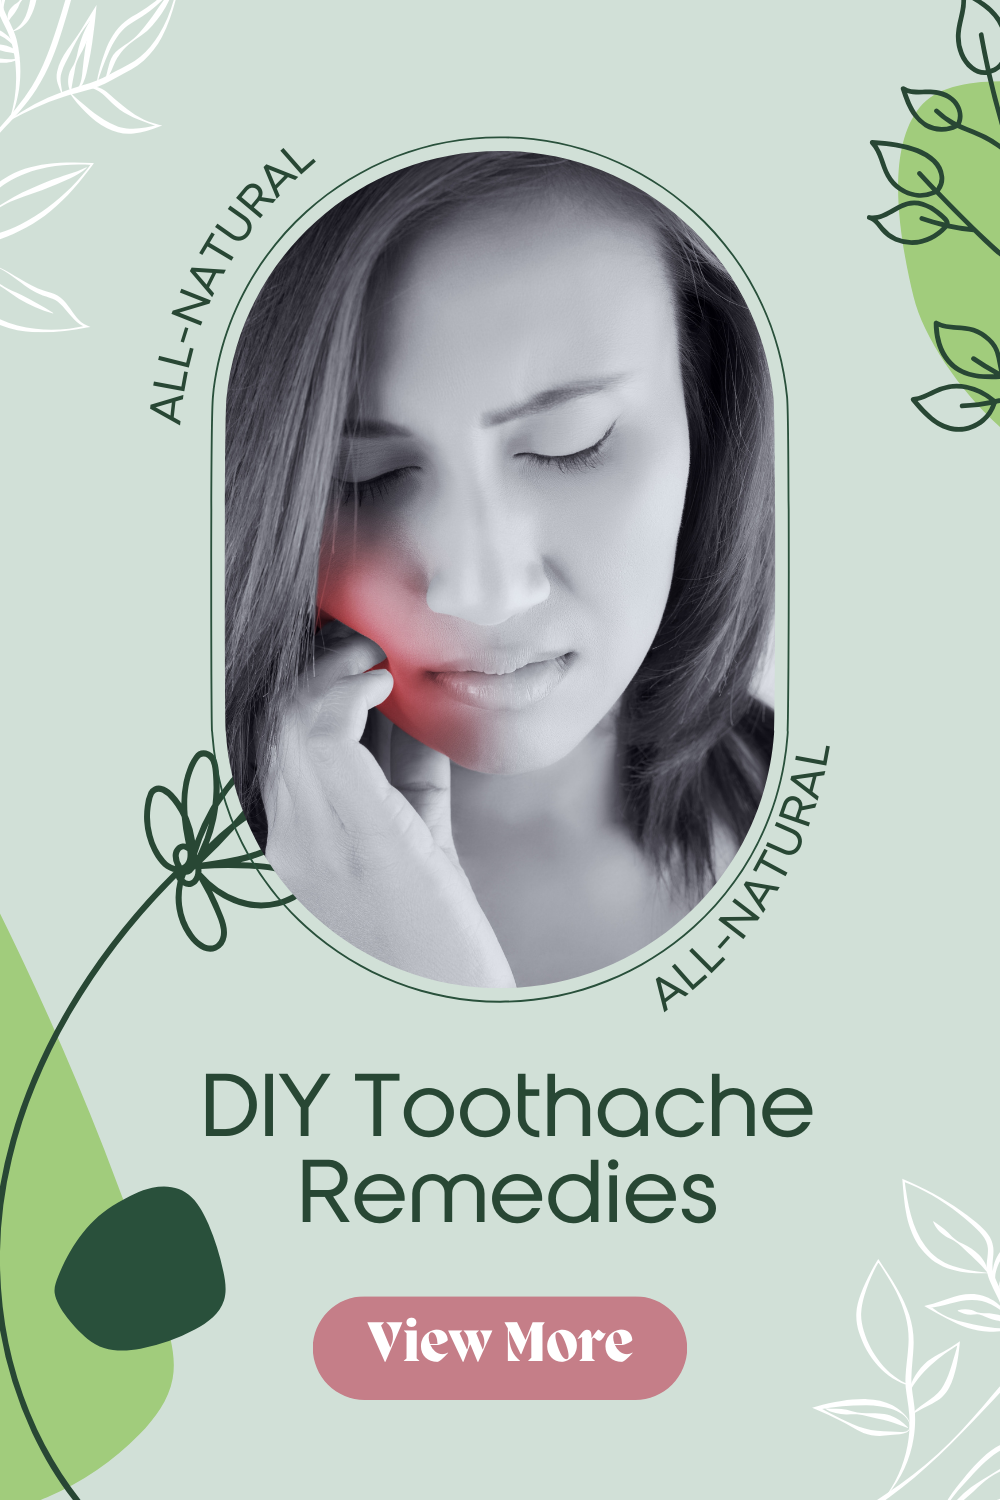 DIY Natural Remedies for Toothaches and Oral Discomfort